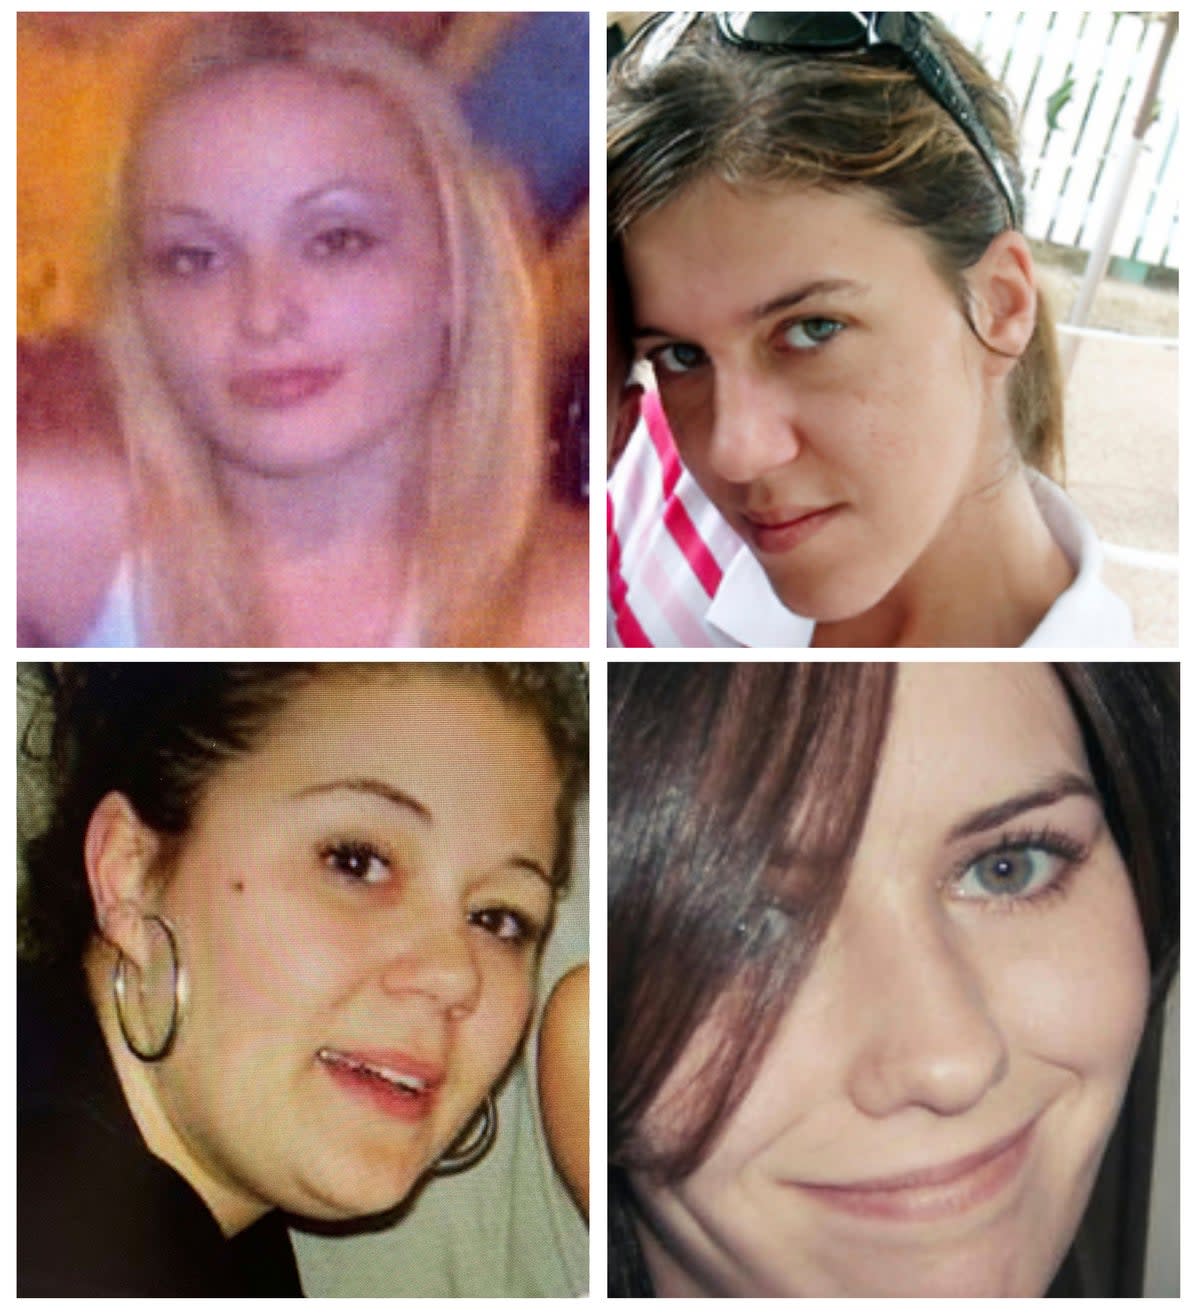 Rex Heuermann, 59, was arrested last week in connection with the brutal murders of Melissa Barthelemy (upper left), Amber Costello (upper right), Megan Waterman (bottom left). He is also the prime suspect in the murder of Maureen Brainard-Barnes (bottom right) (AP)